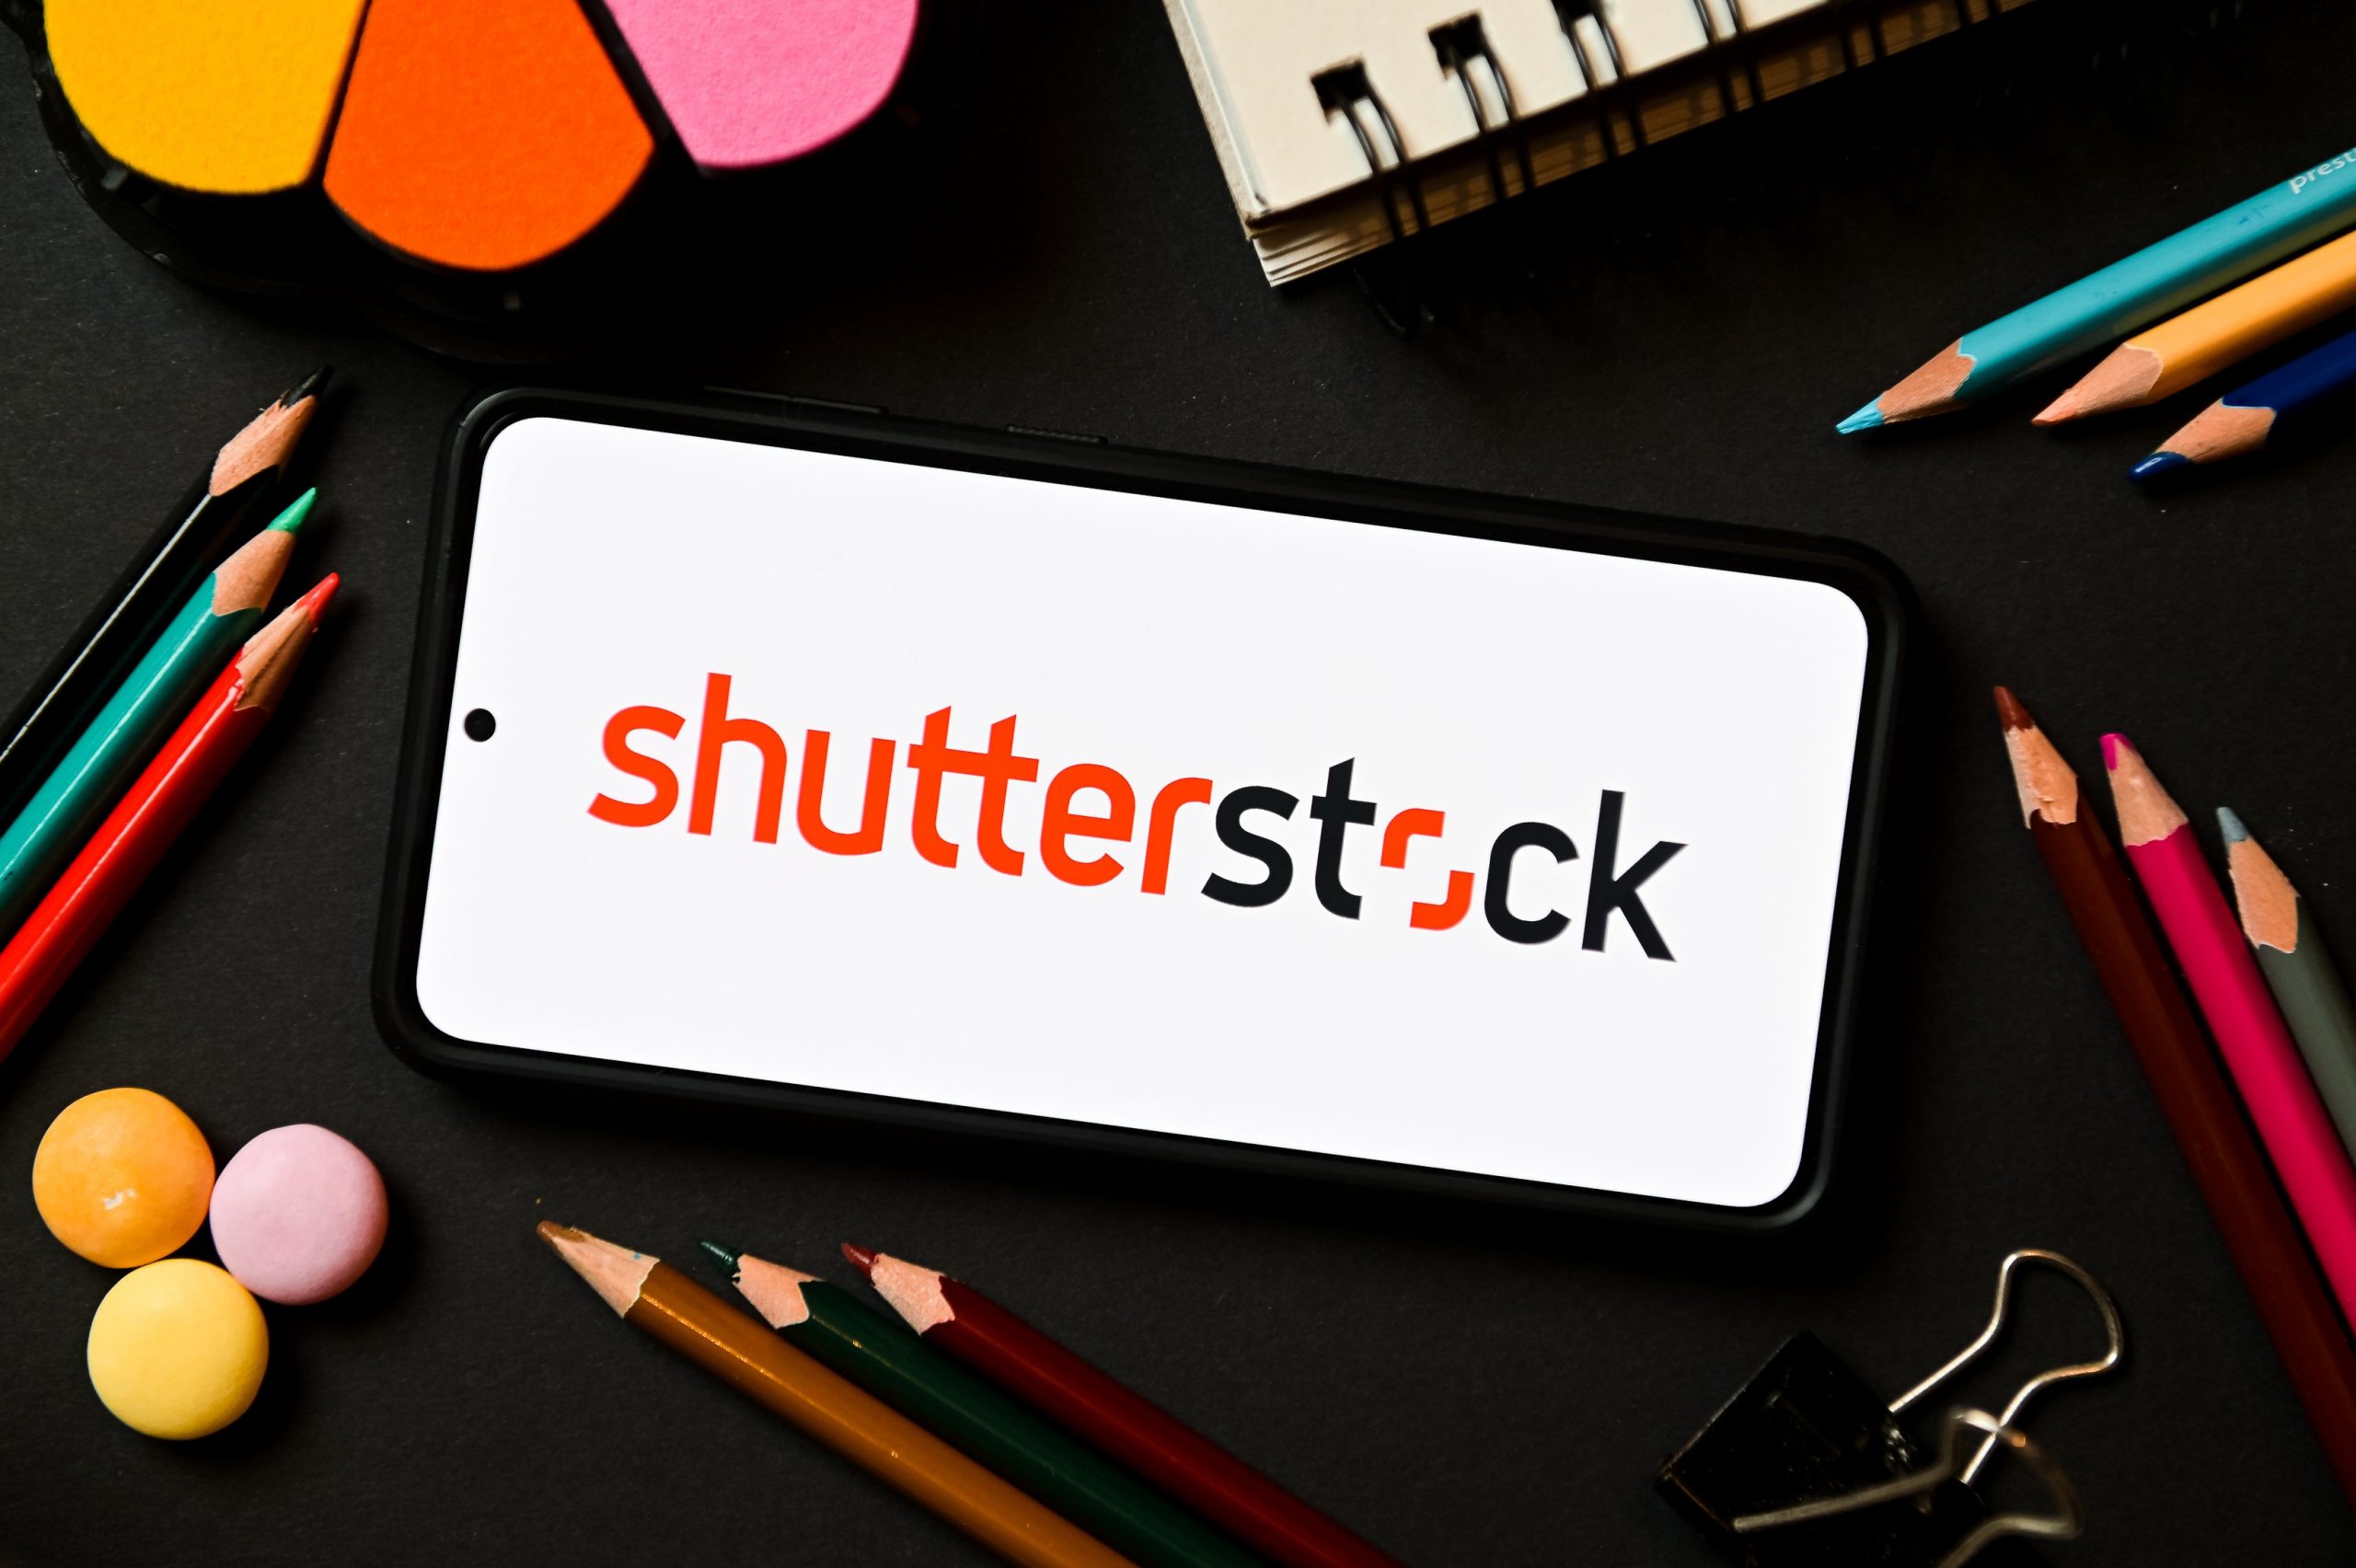 Shutterstock launches an AI image generator. Just what we needed.